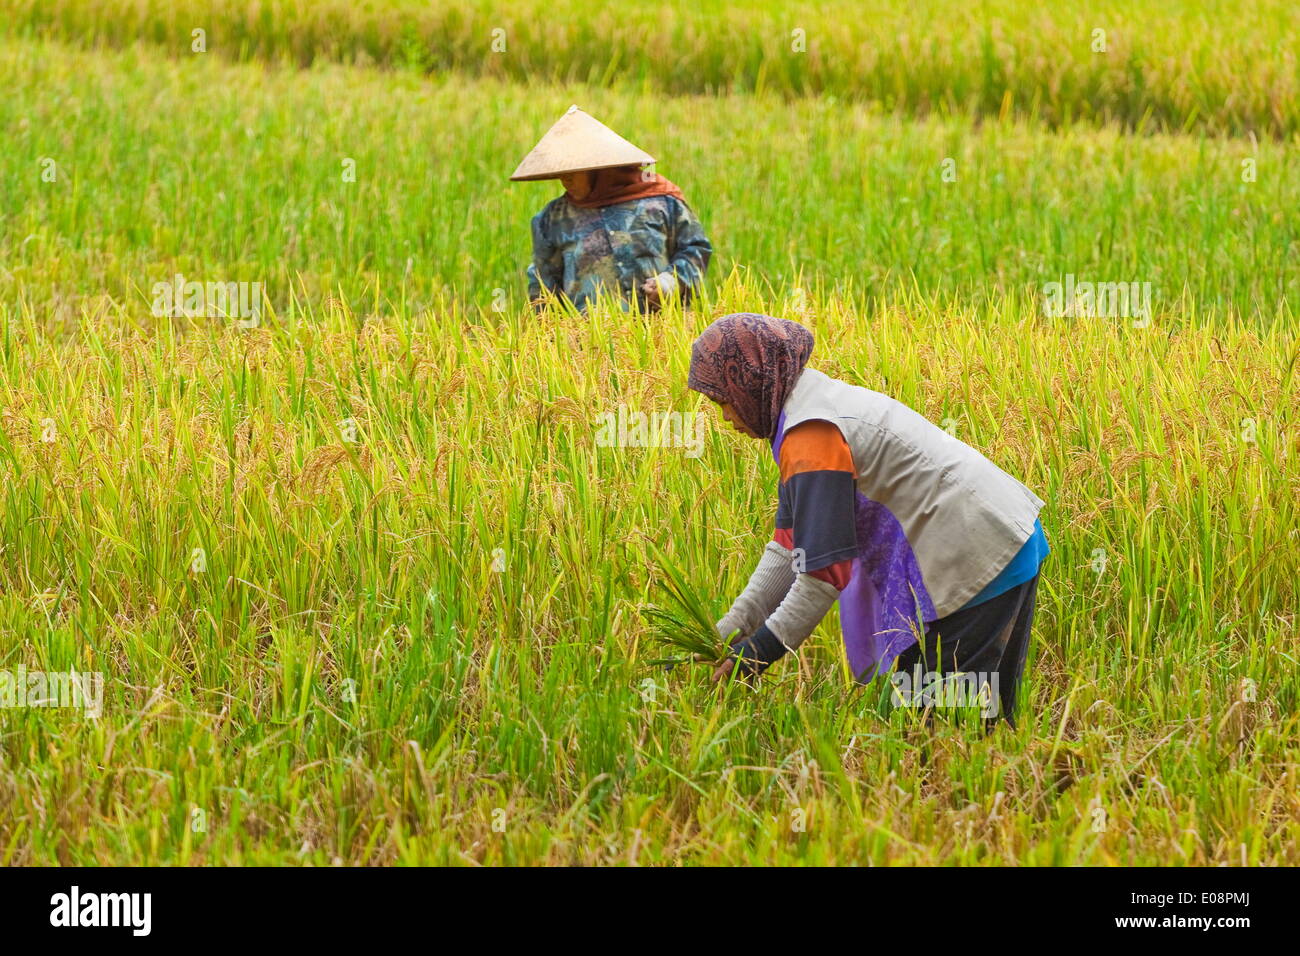 Women in conical hat and scarf working in rice field in this rural area west of Pangandaran, Cijulang, West Java, Java, Indonesia, Southeast Asia, Asia Stock Photo